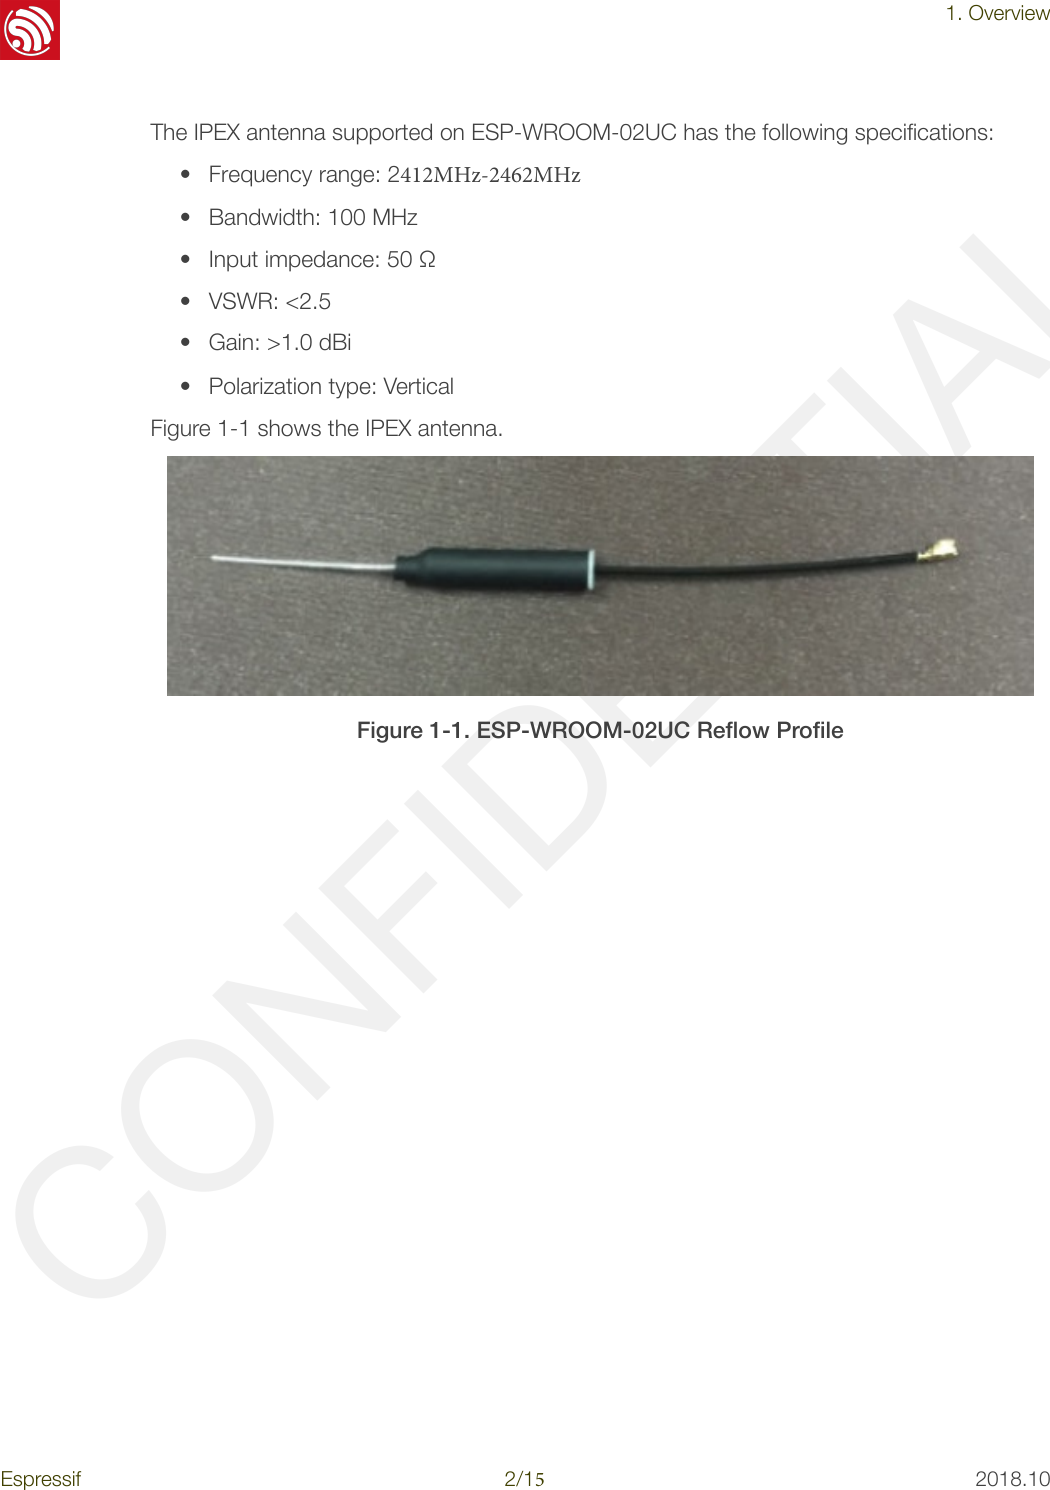 CONFIDENTIAL!1. OverviewThe IPEX antenna supported on ESP-WROOM-02UC has the following speciﬁcations:  •Frequency range: 2412MHz-2462MHz• Bandwidth: 100 MHz• Input impedance: 50 Ω• VSWR: &lt;2.5• Gain: &gt;1.0 dBi• Polarization type: VerticalFigure 1-1 shows the IPEX antenna.  !Figure 1-1. ESP-WROOM-02UC Reﬂow Proﬁle  Espressif!2/!152018.10